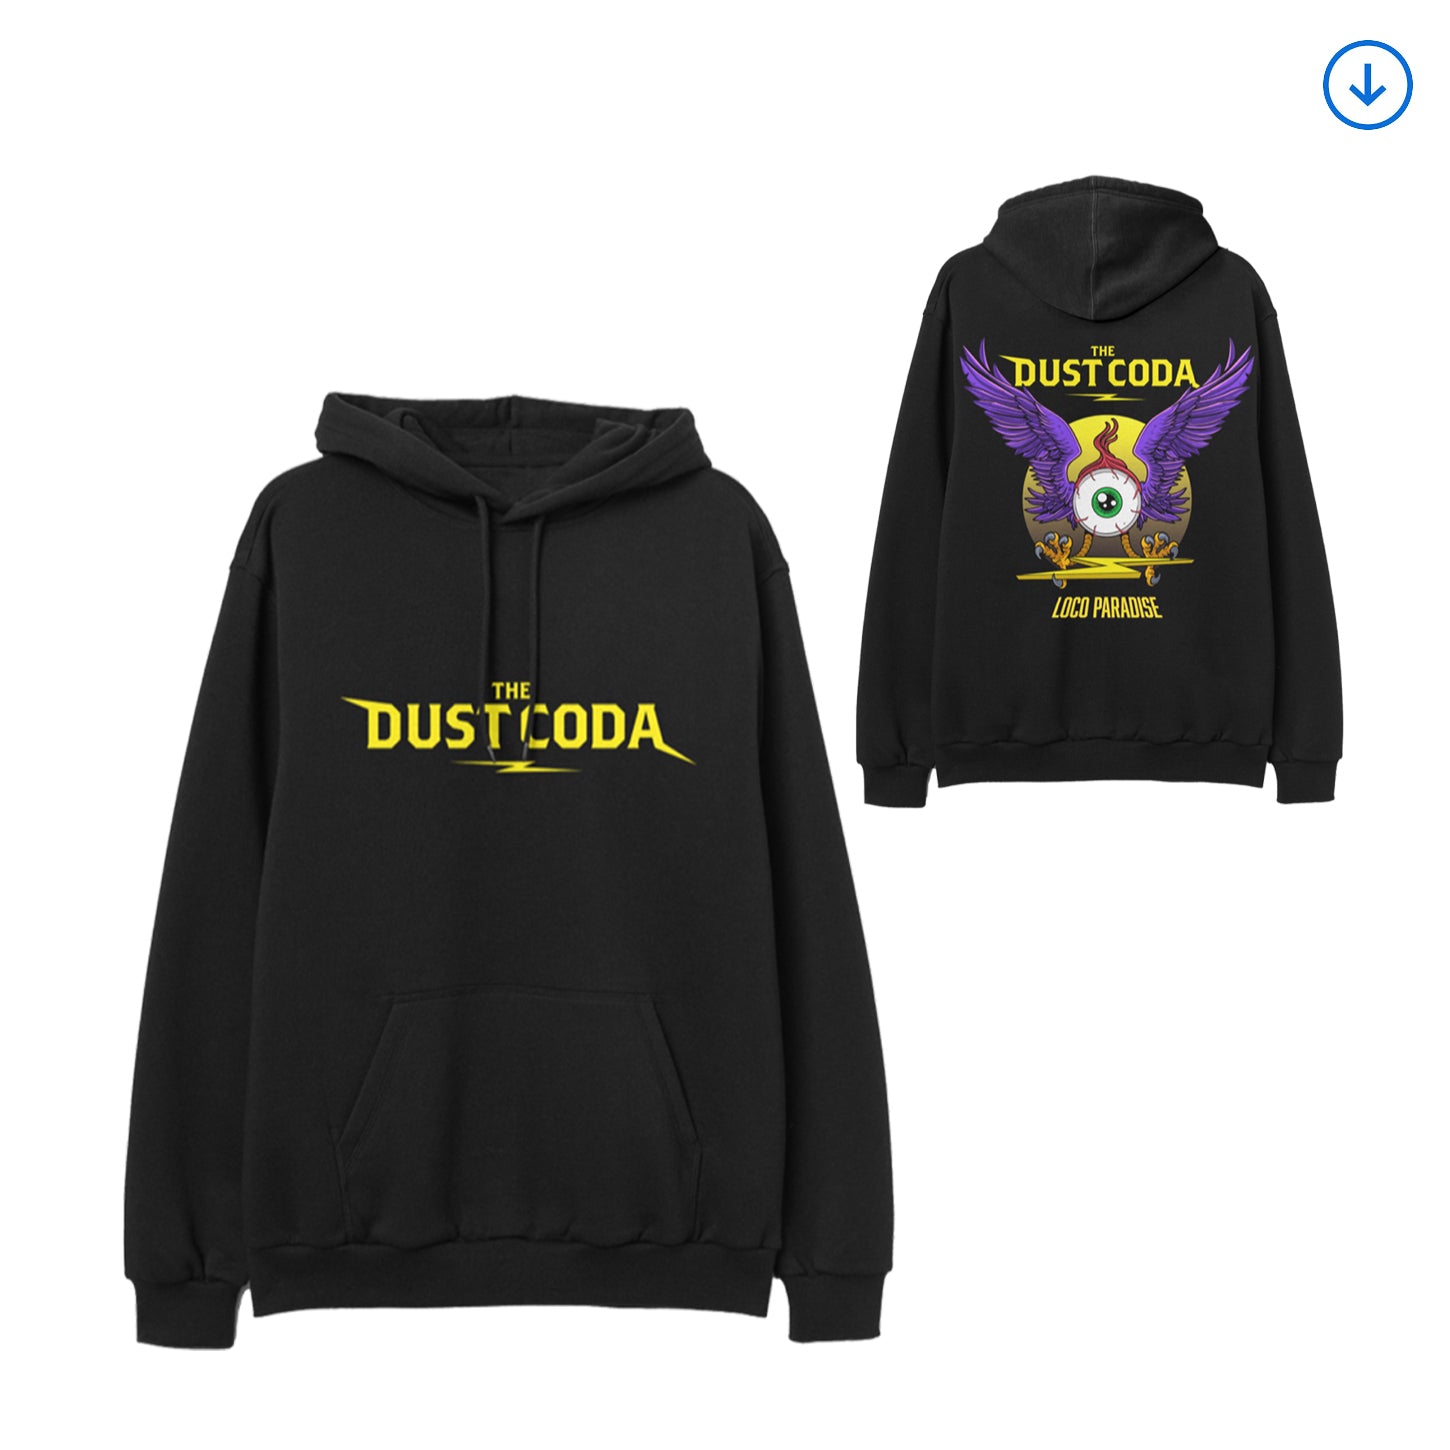 The Dust Coda "Loco Paradise" Pullover Hoodie